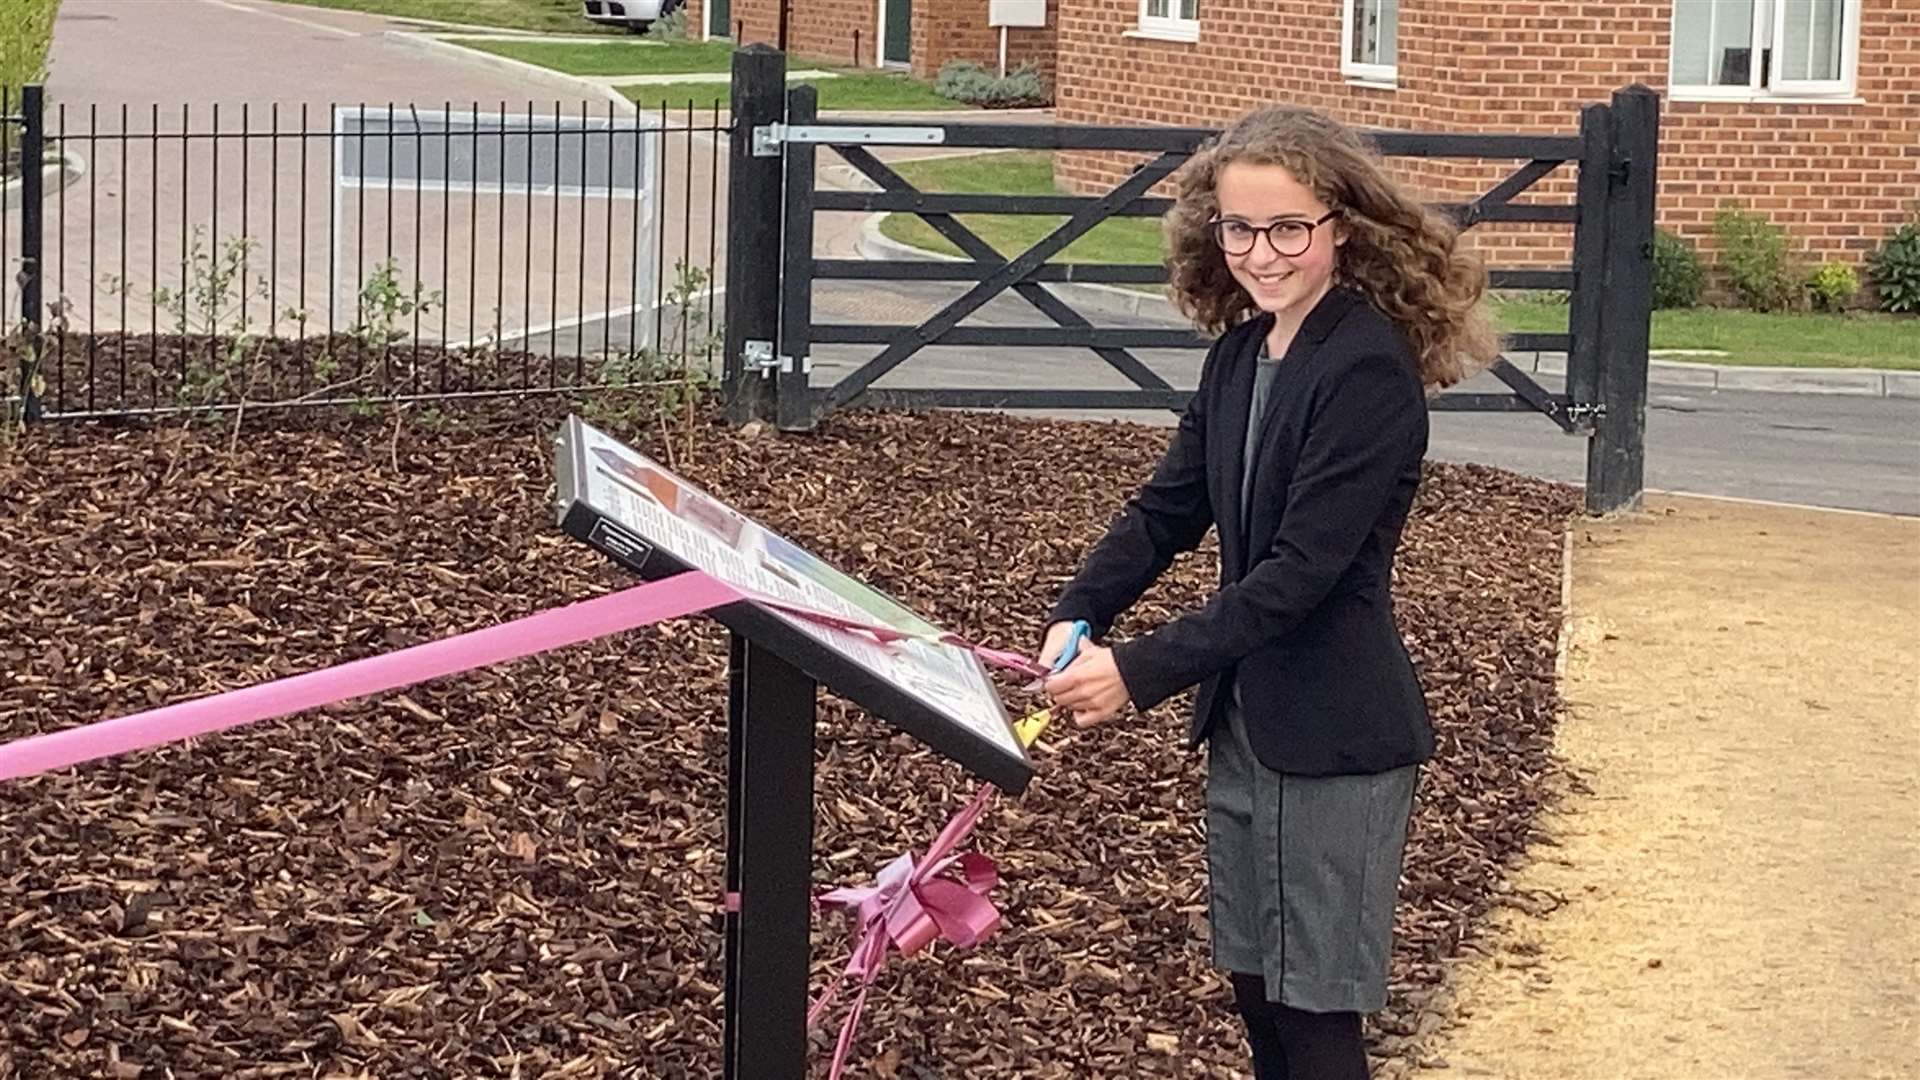 Ellie Wolfe, 12, cuts the ribbon to unveil the Romano-British temple uncovered outside her home in Newington near Sittingbourne. She attends Rainham Mark Grammar School